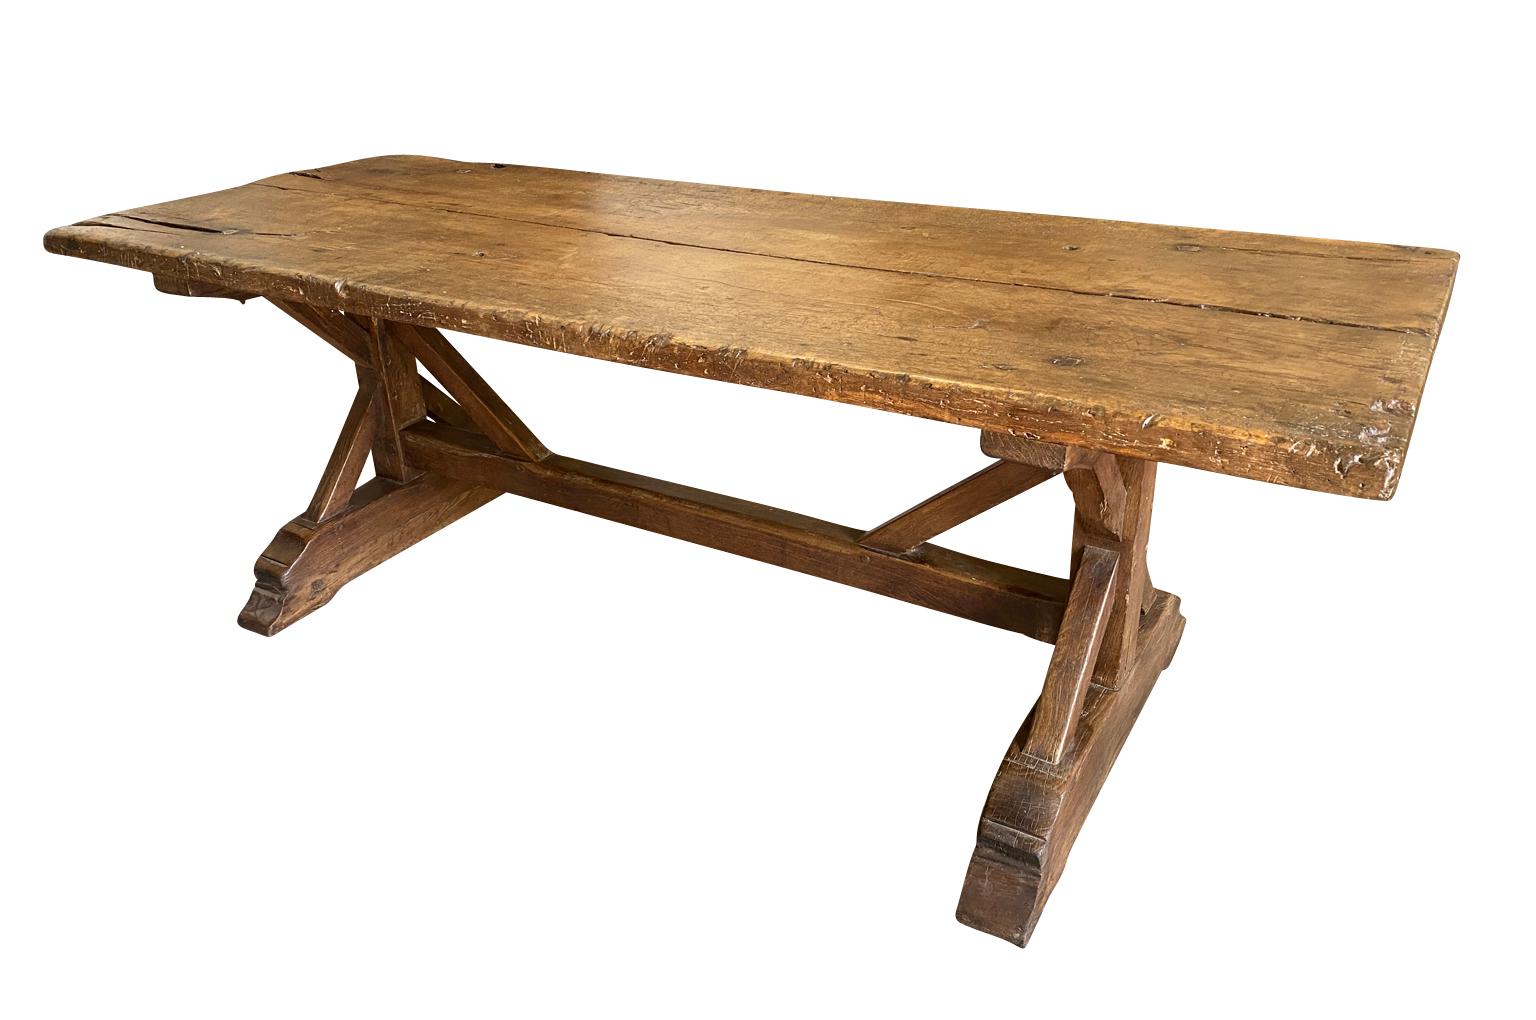 Oak Early 19th Century Rustic French Farm Table, Trestle Table